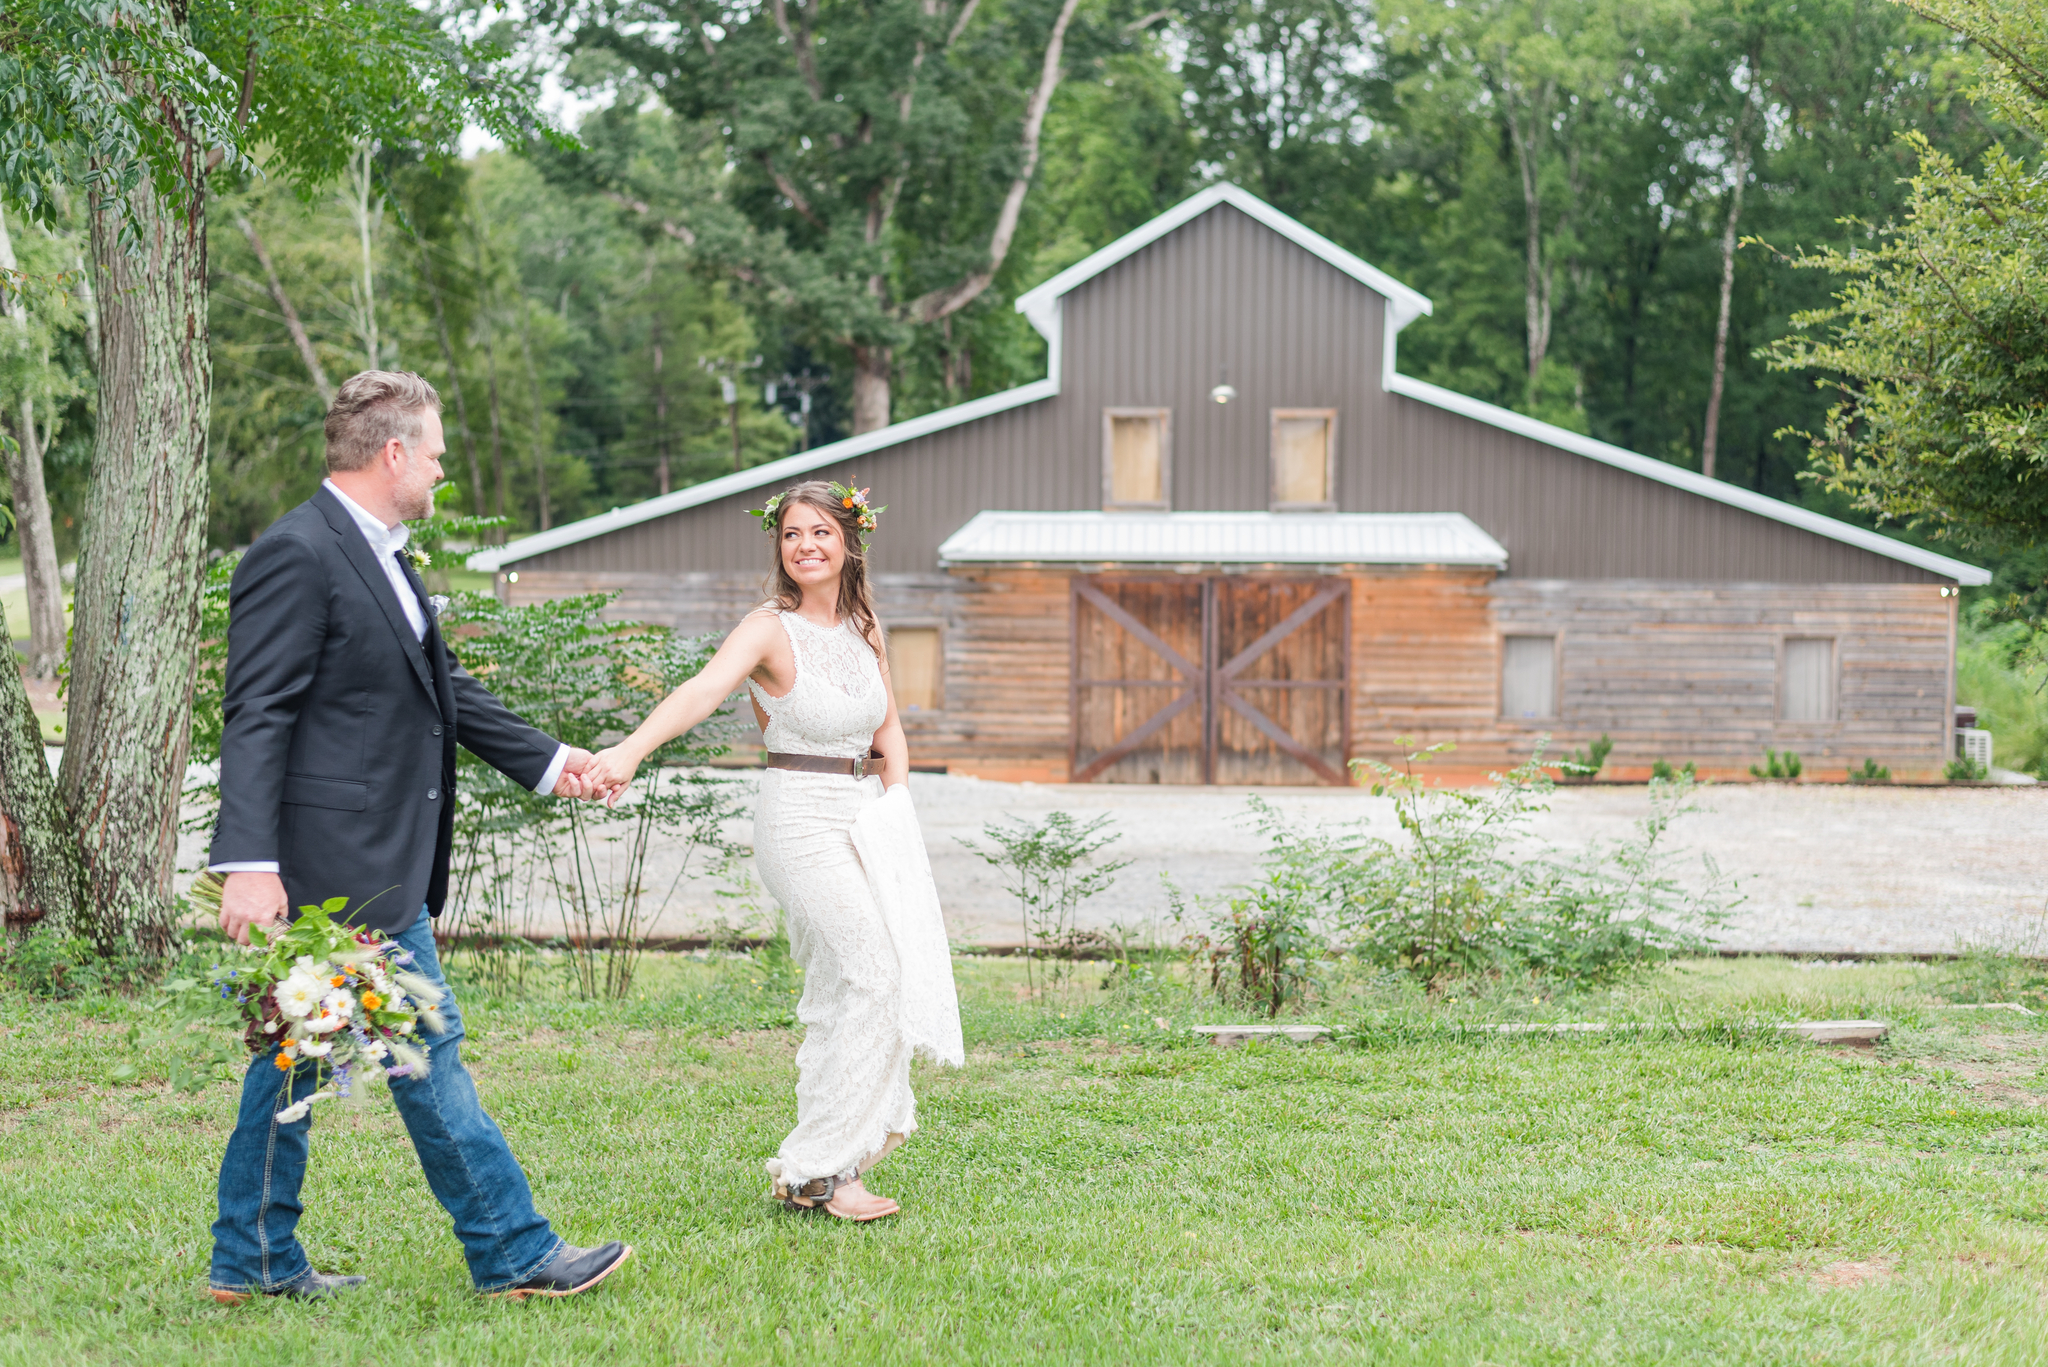 A bride and groom are walking in front of Iron Oak Barn - a rustic barn clad in brown